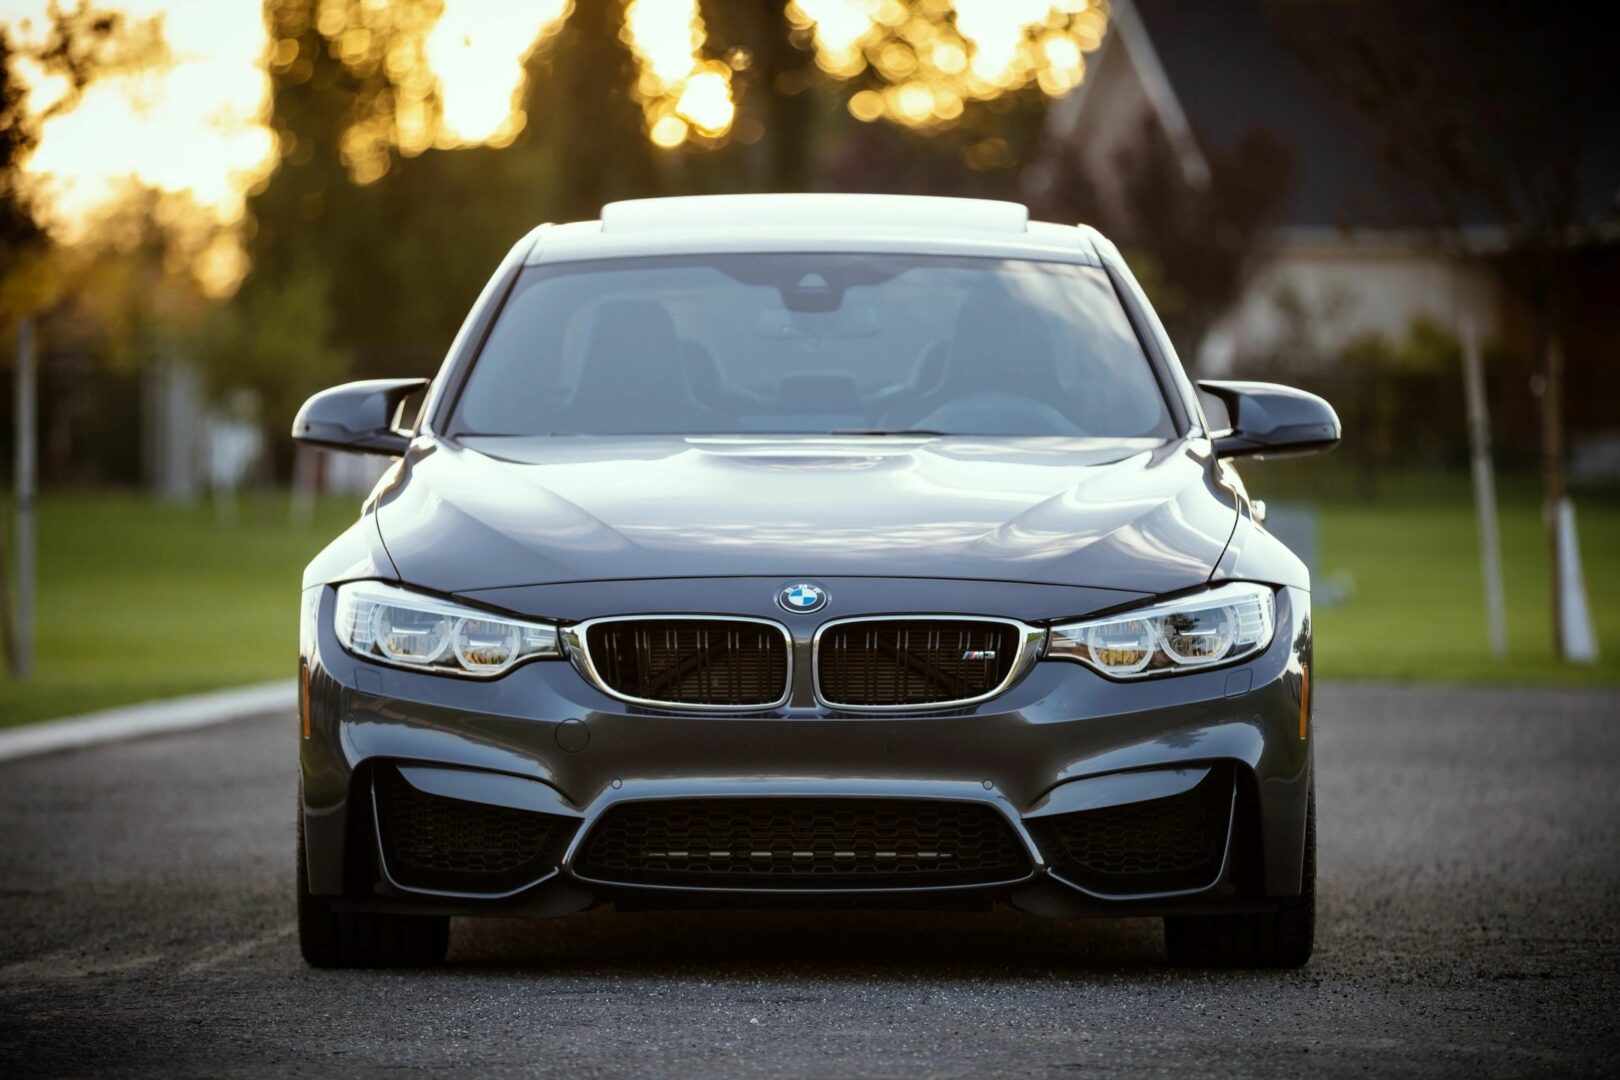 A close up of the front end of a bmw car